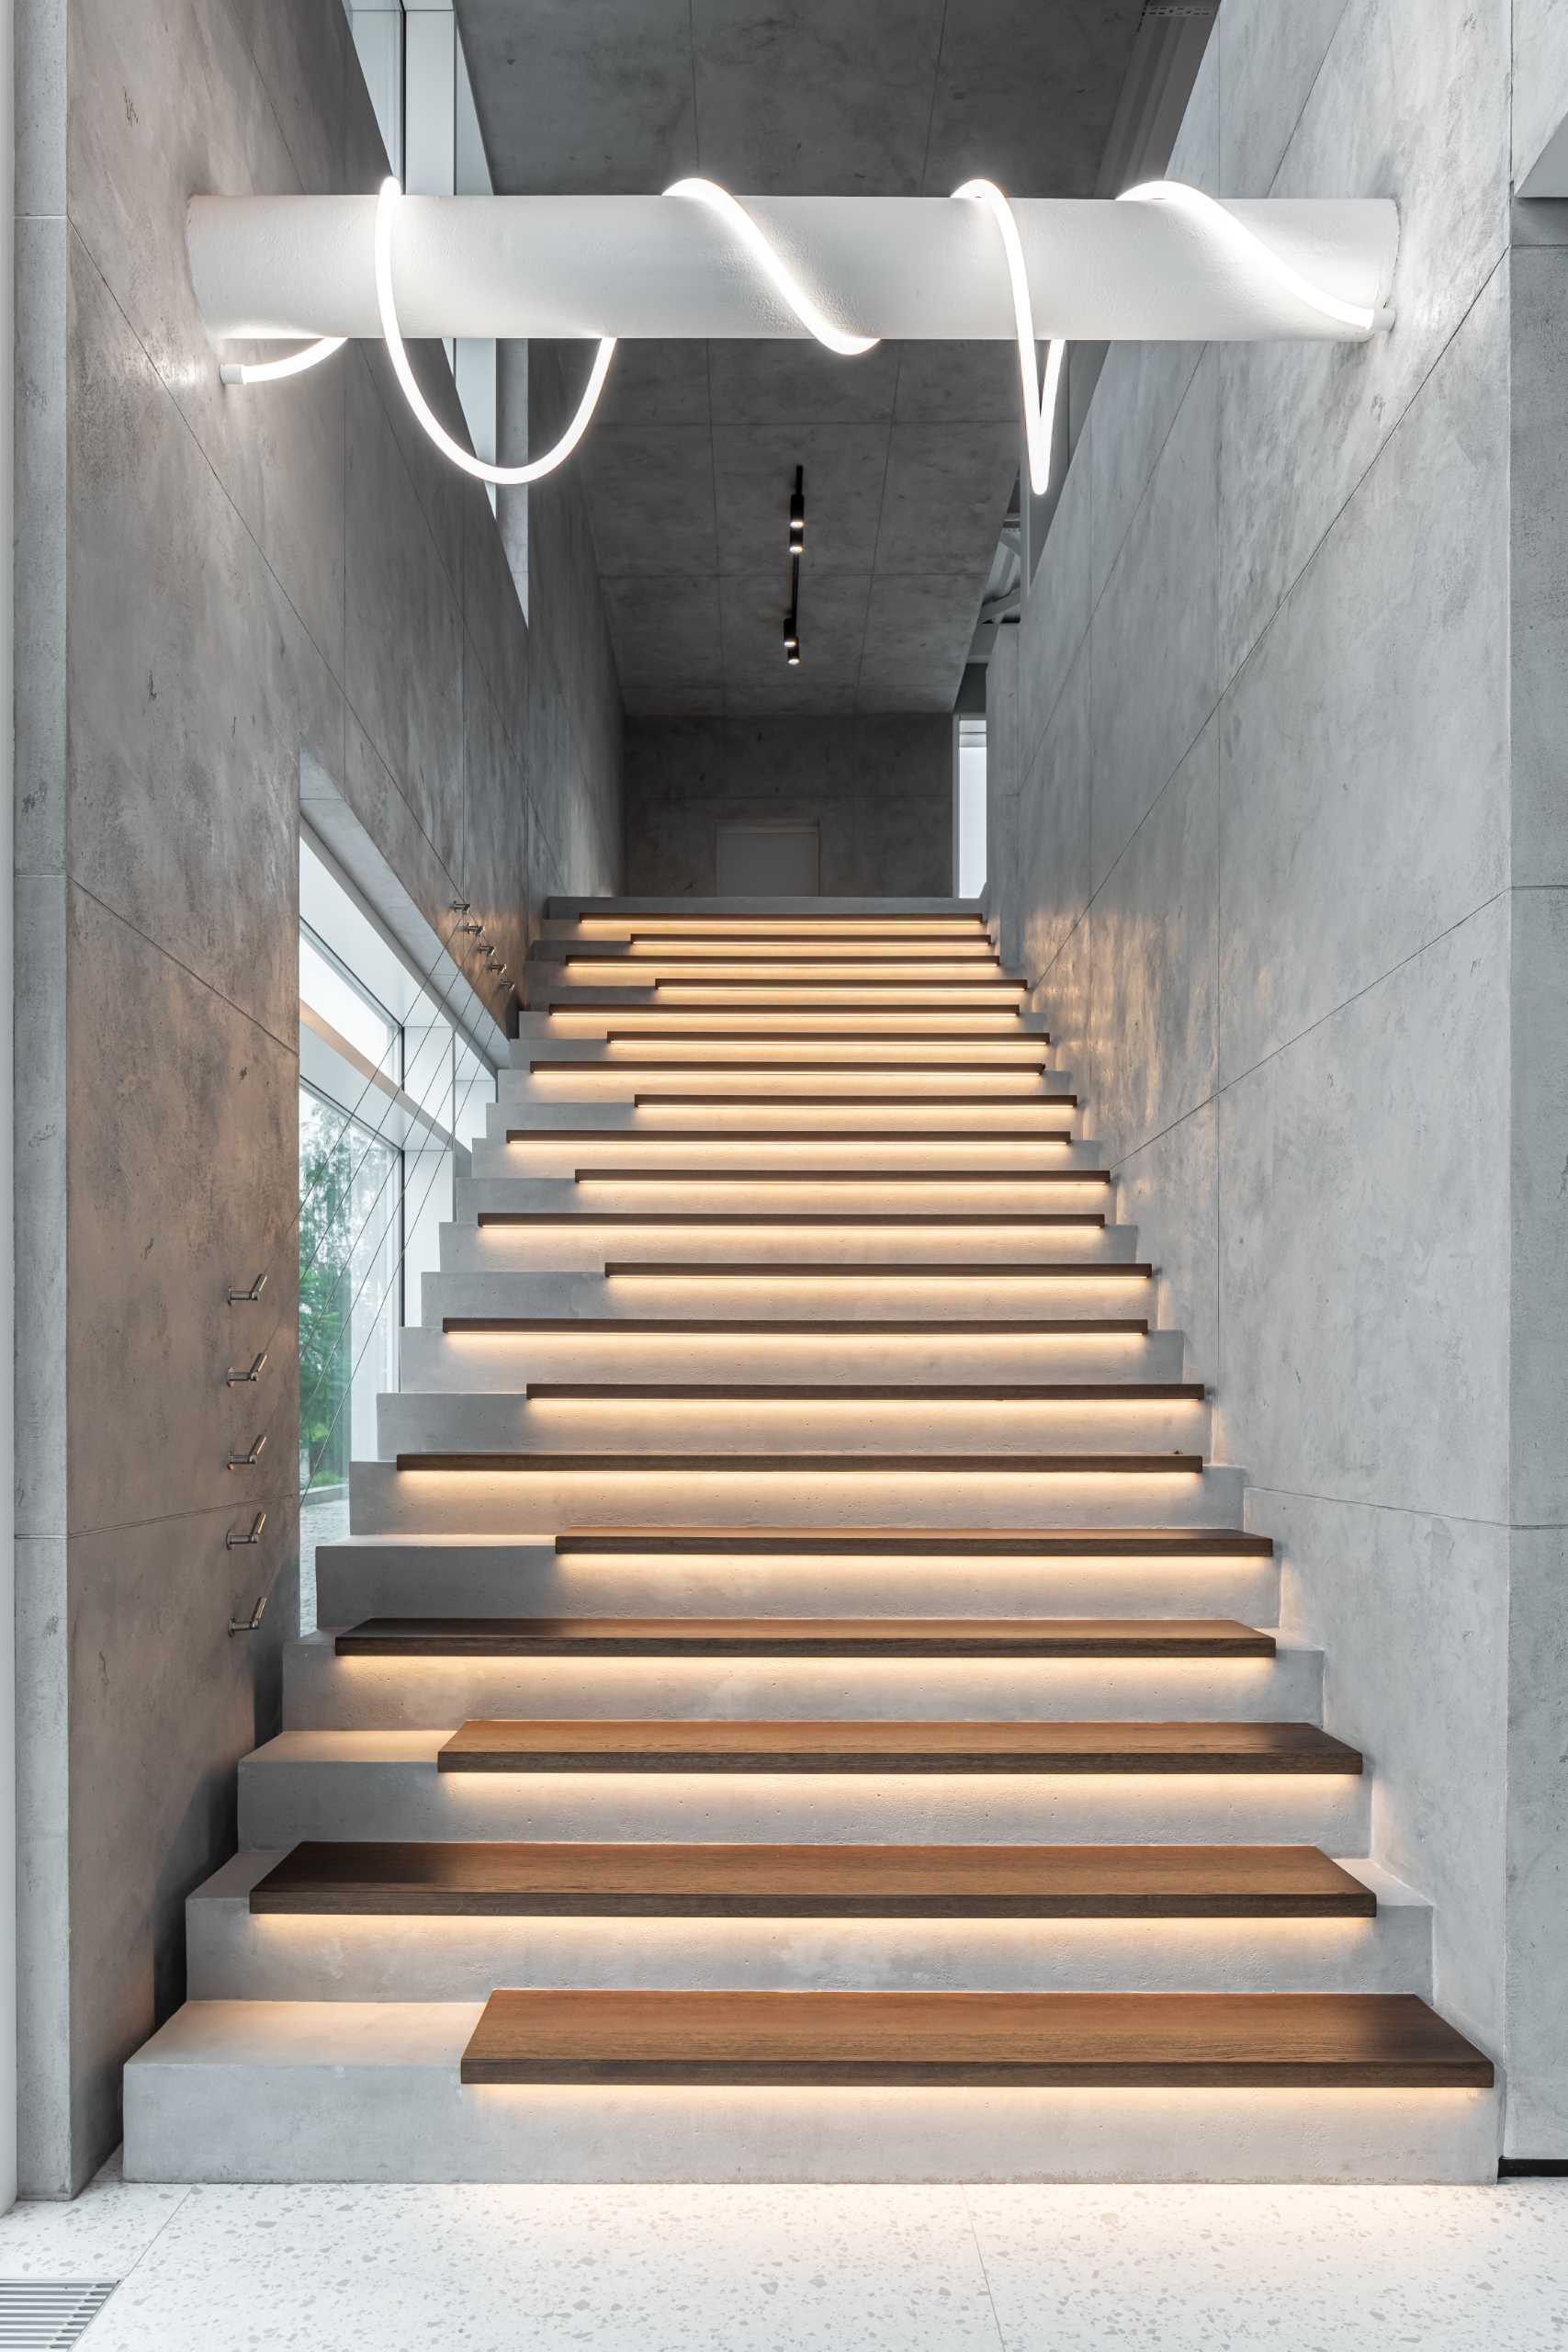 A modern home with concrete and wood stairs, that also include hidden lighting underneath the treads